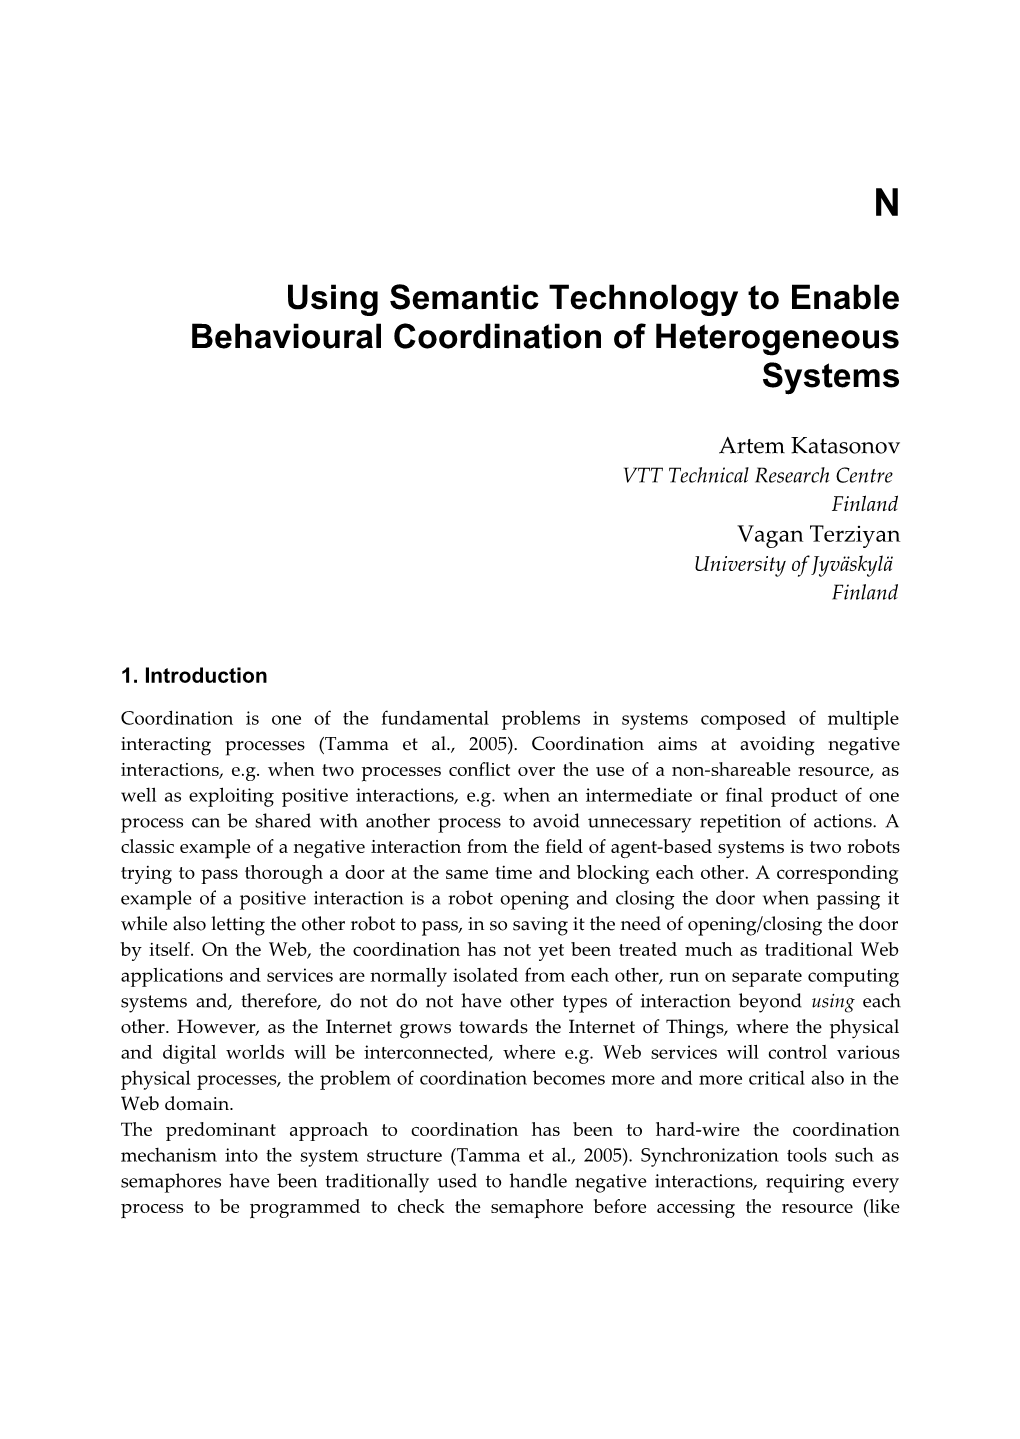 Using Semantic Technology to Enable Behavioural Coordination of Heterogeneous Systems